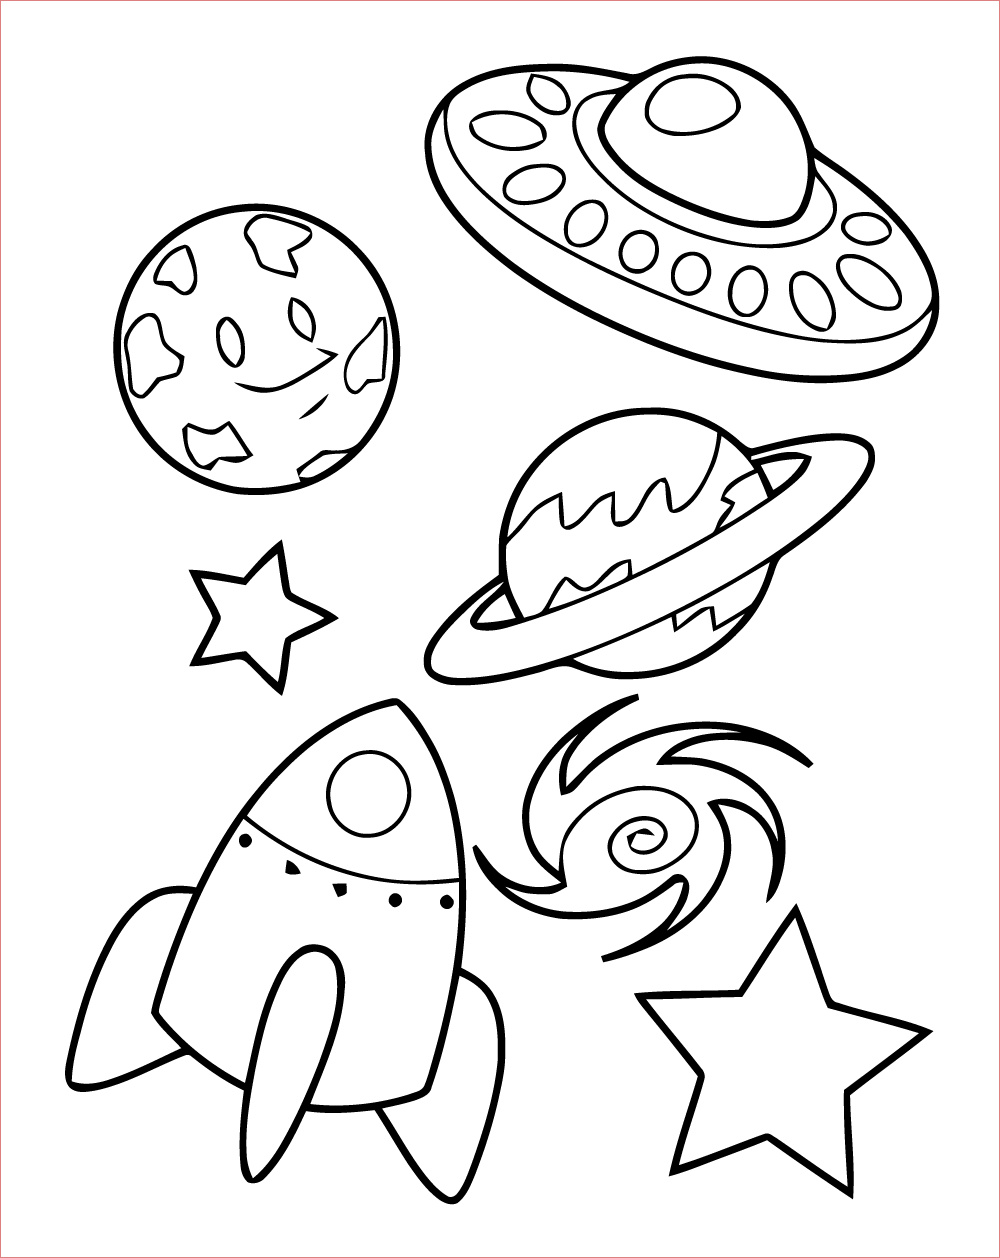 image=space Coloring for kids space 2